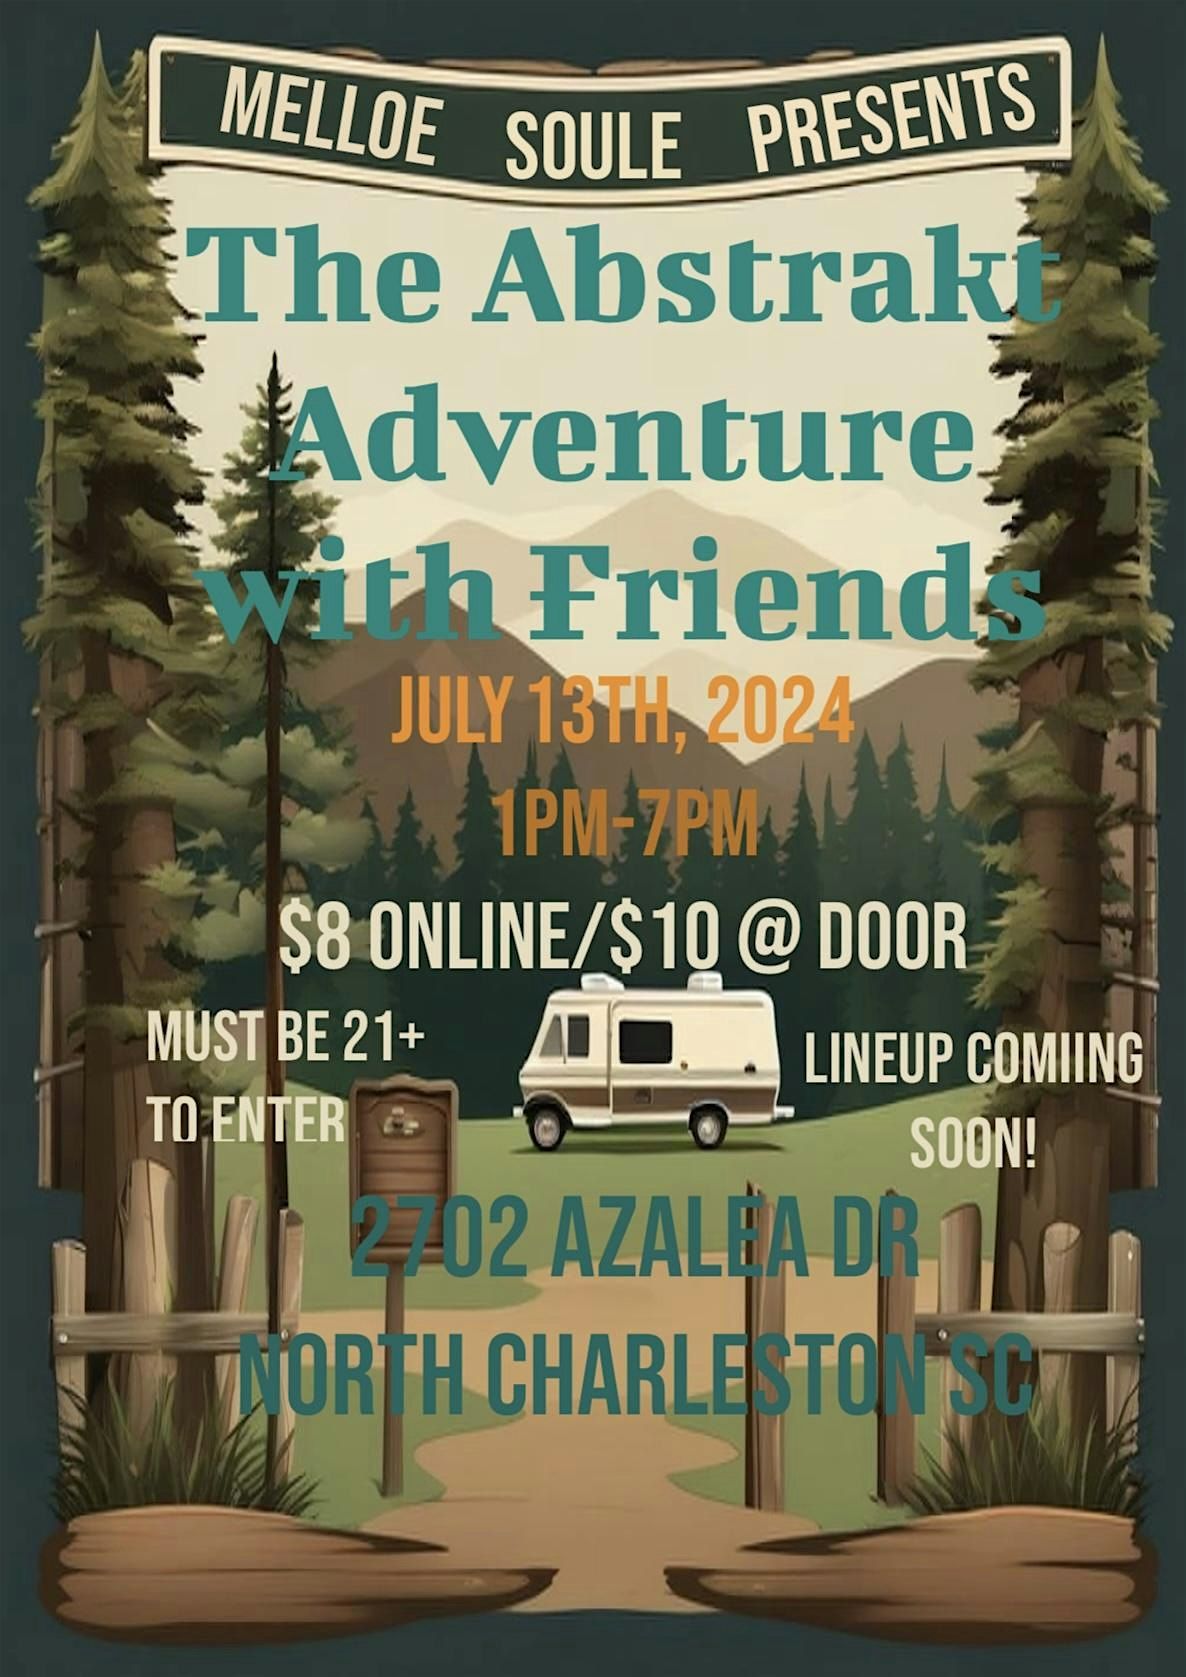 The Abstrakt Adventure with Friends